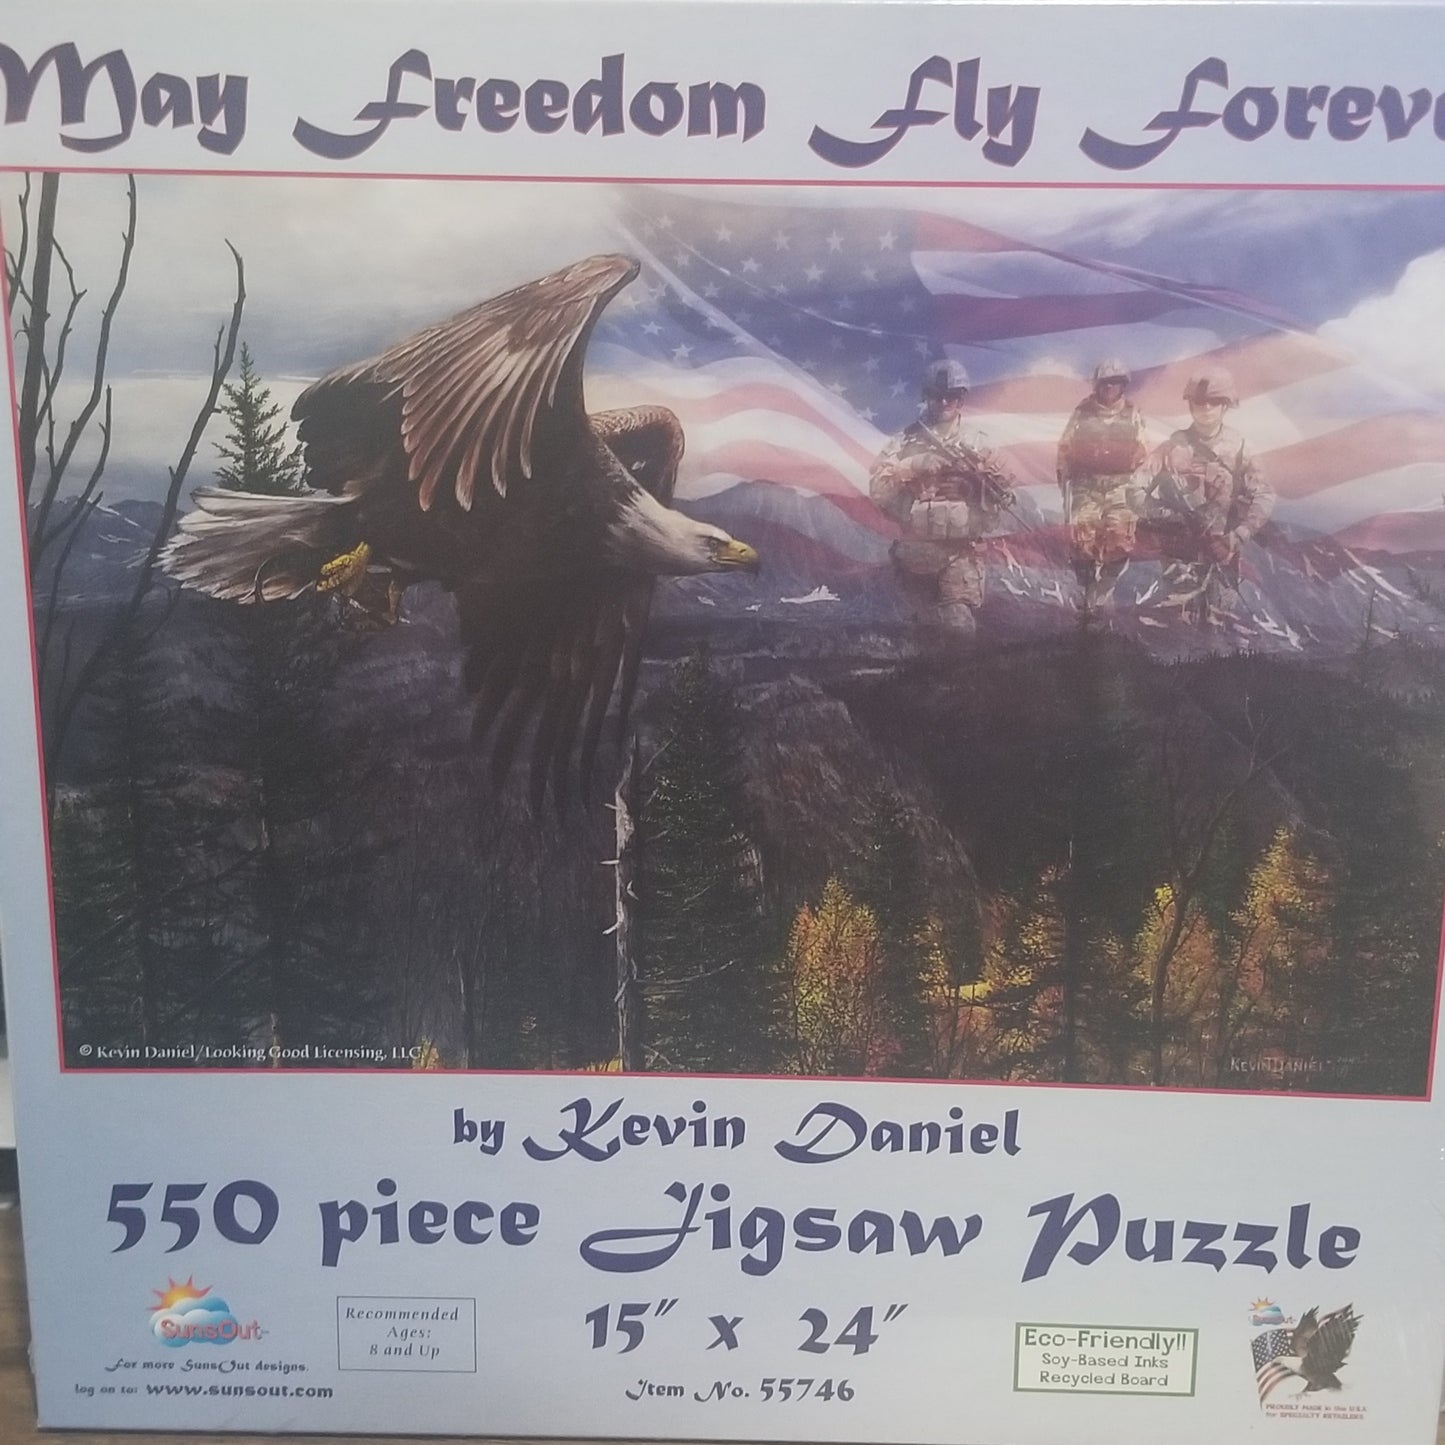 May Freedom Fly Forever by Kevin Daniel, 550 Piece Puzzle